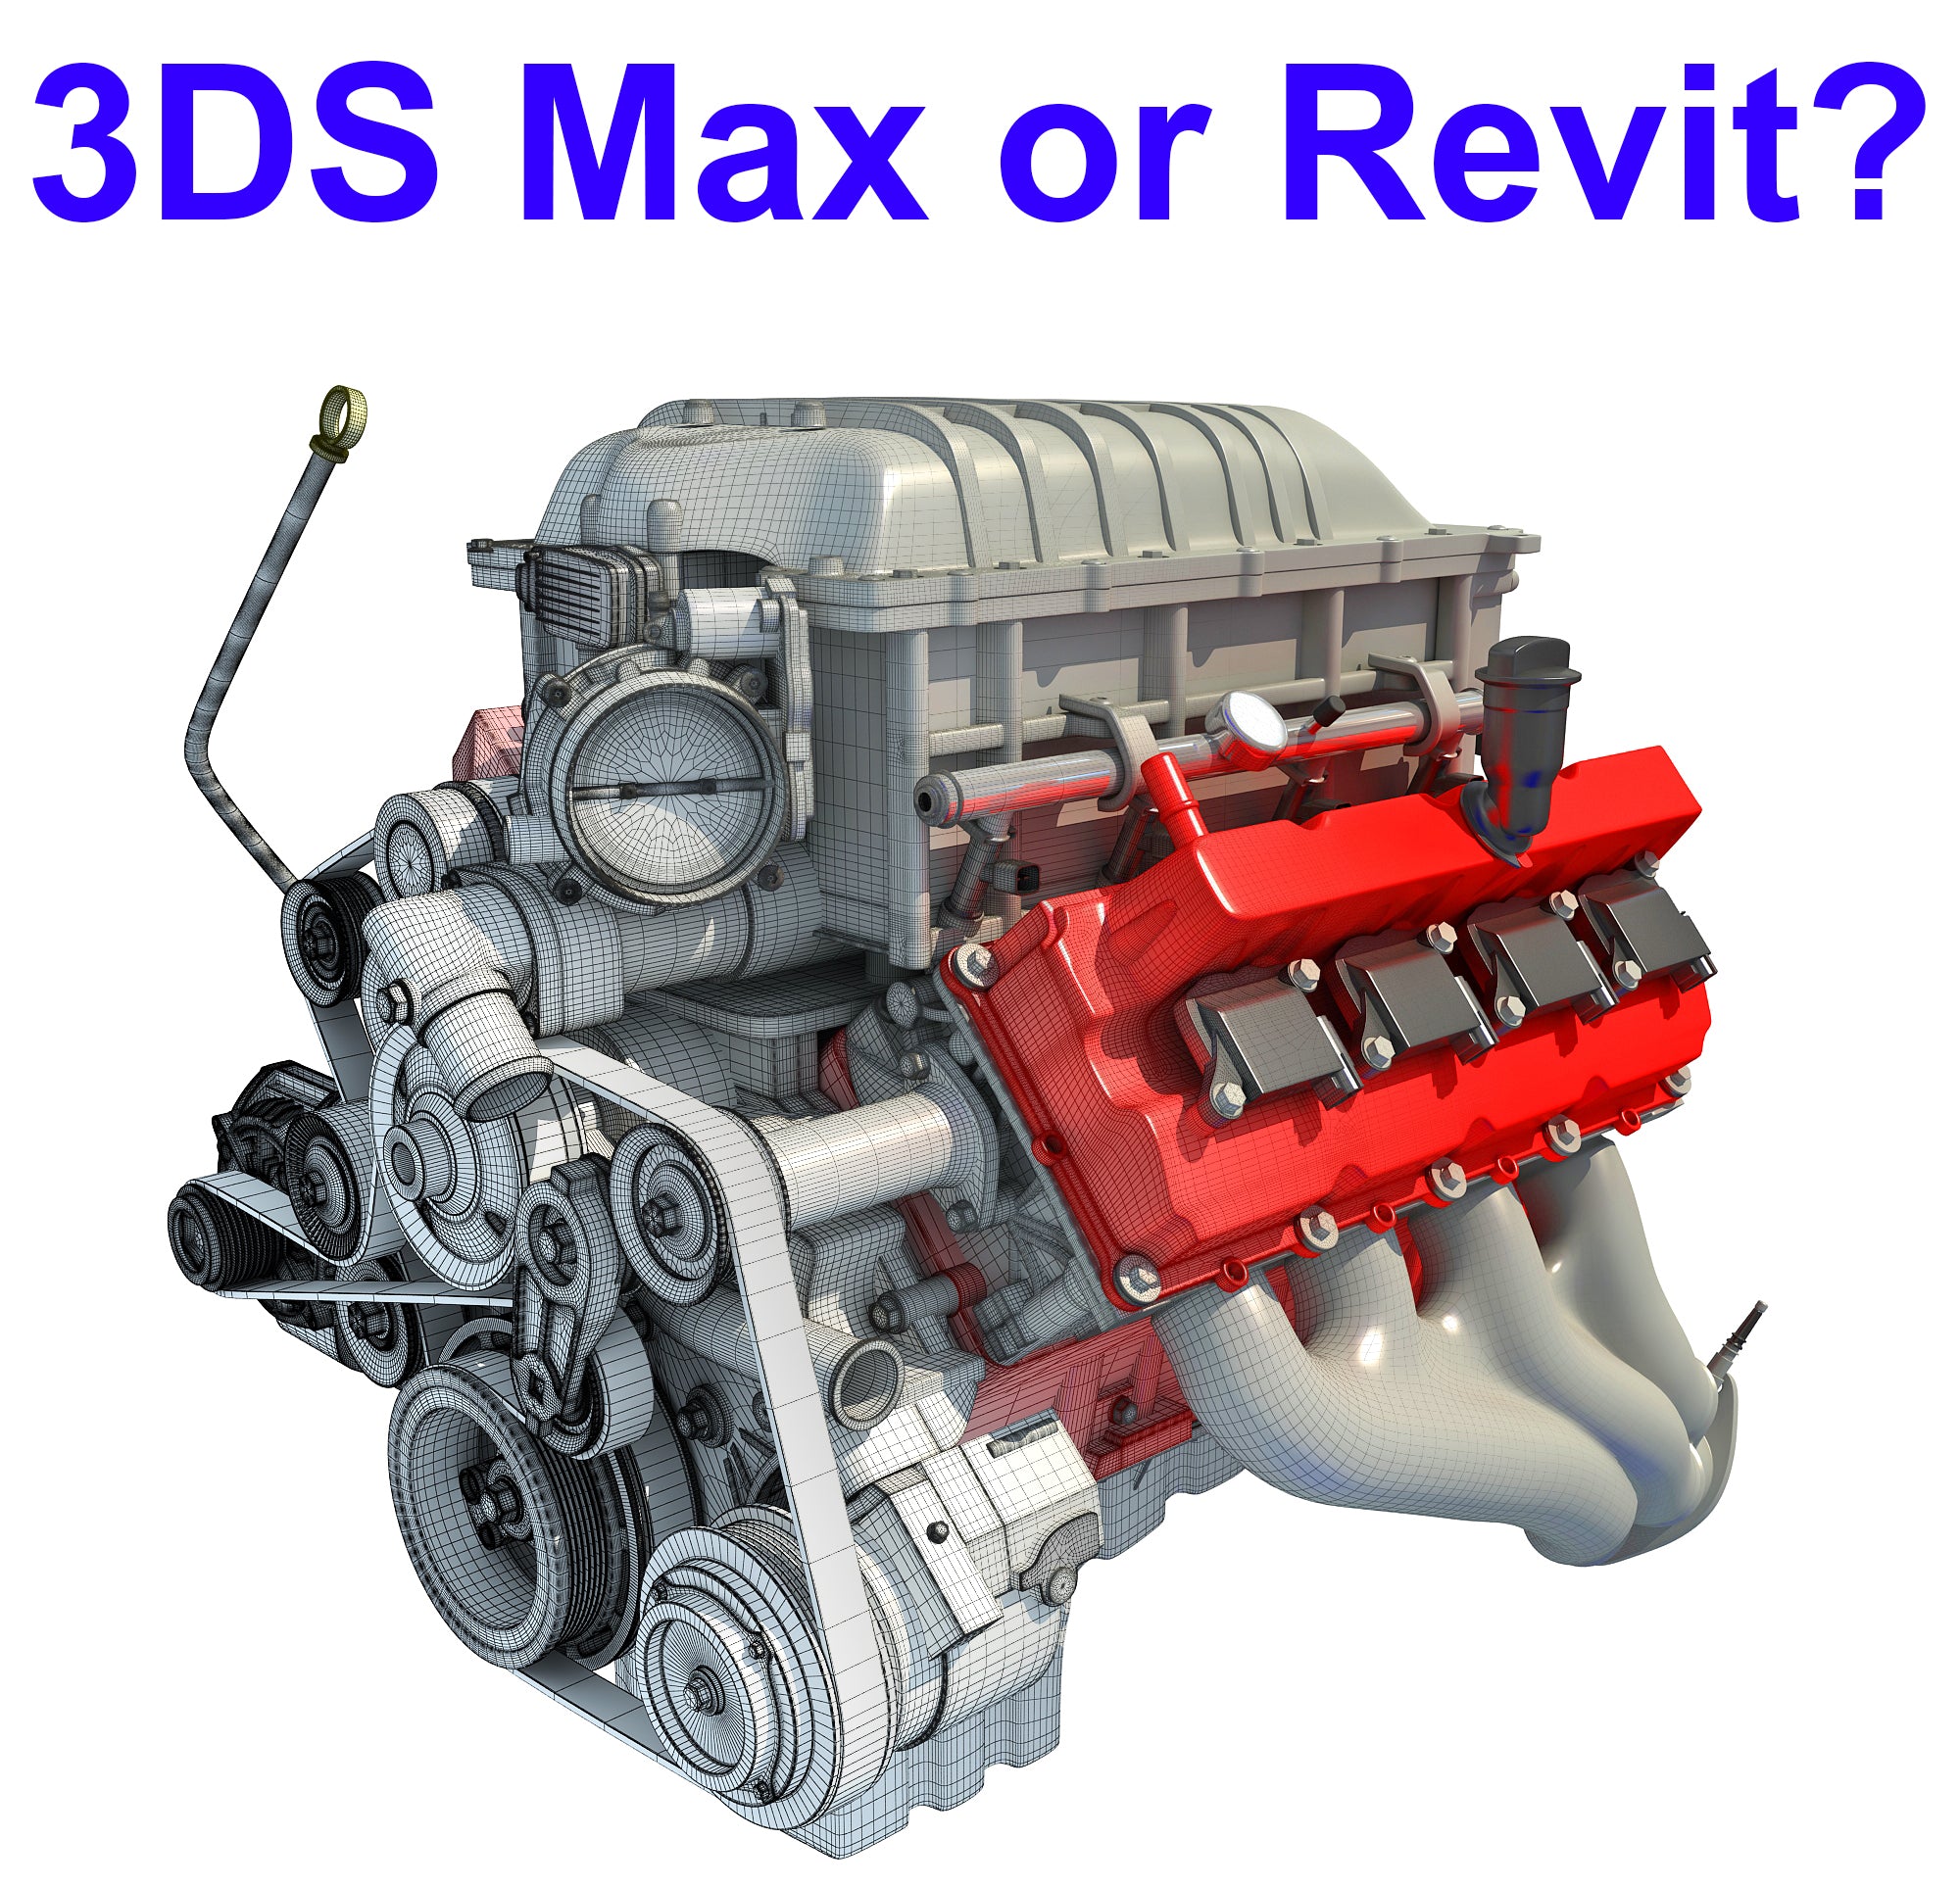 3DS Max or Revit, which is Better?